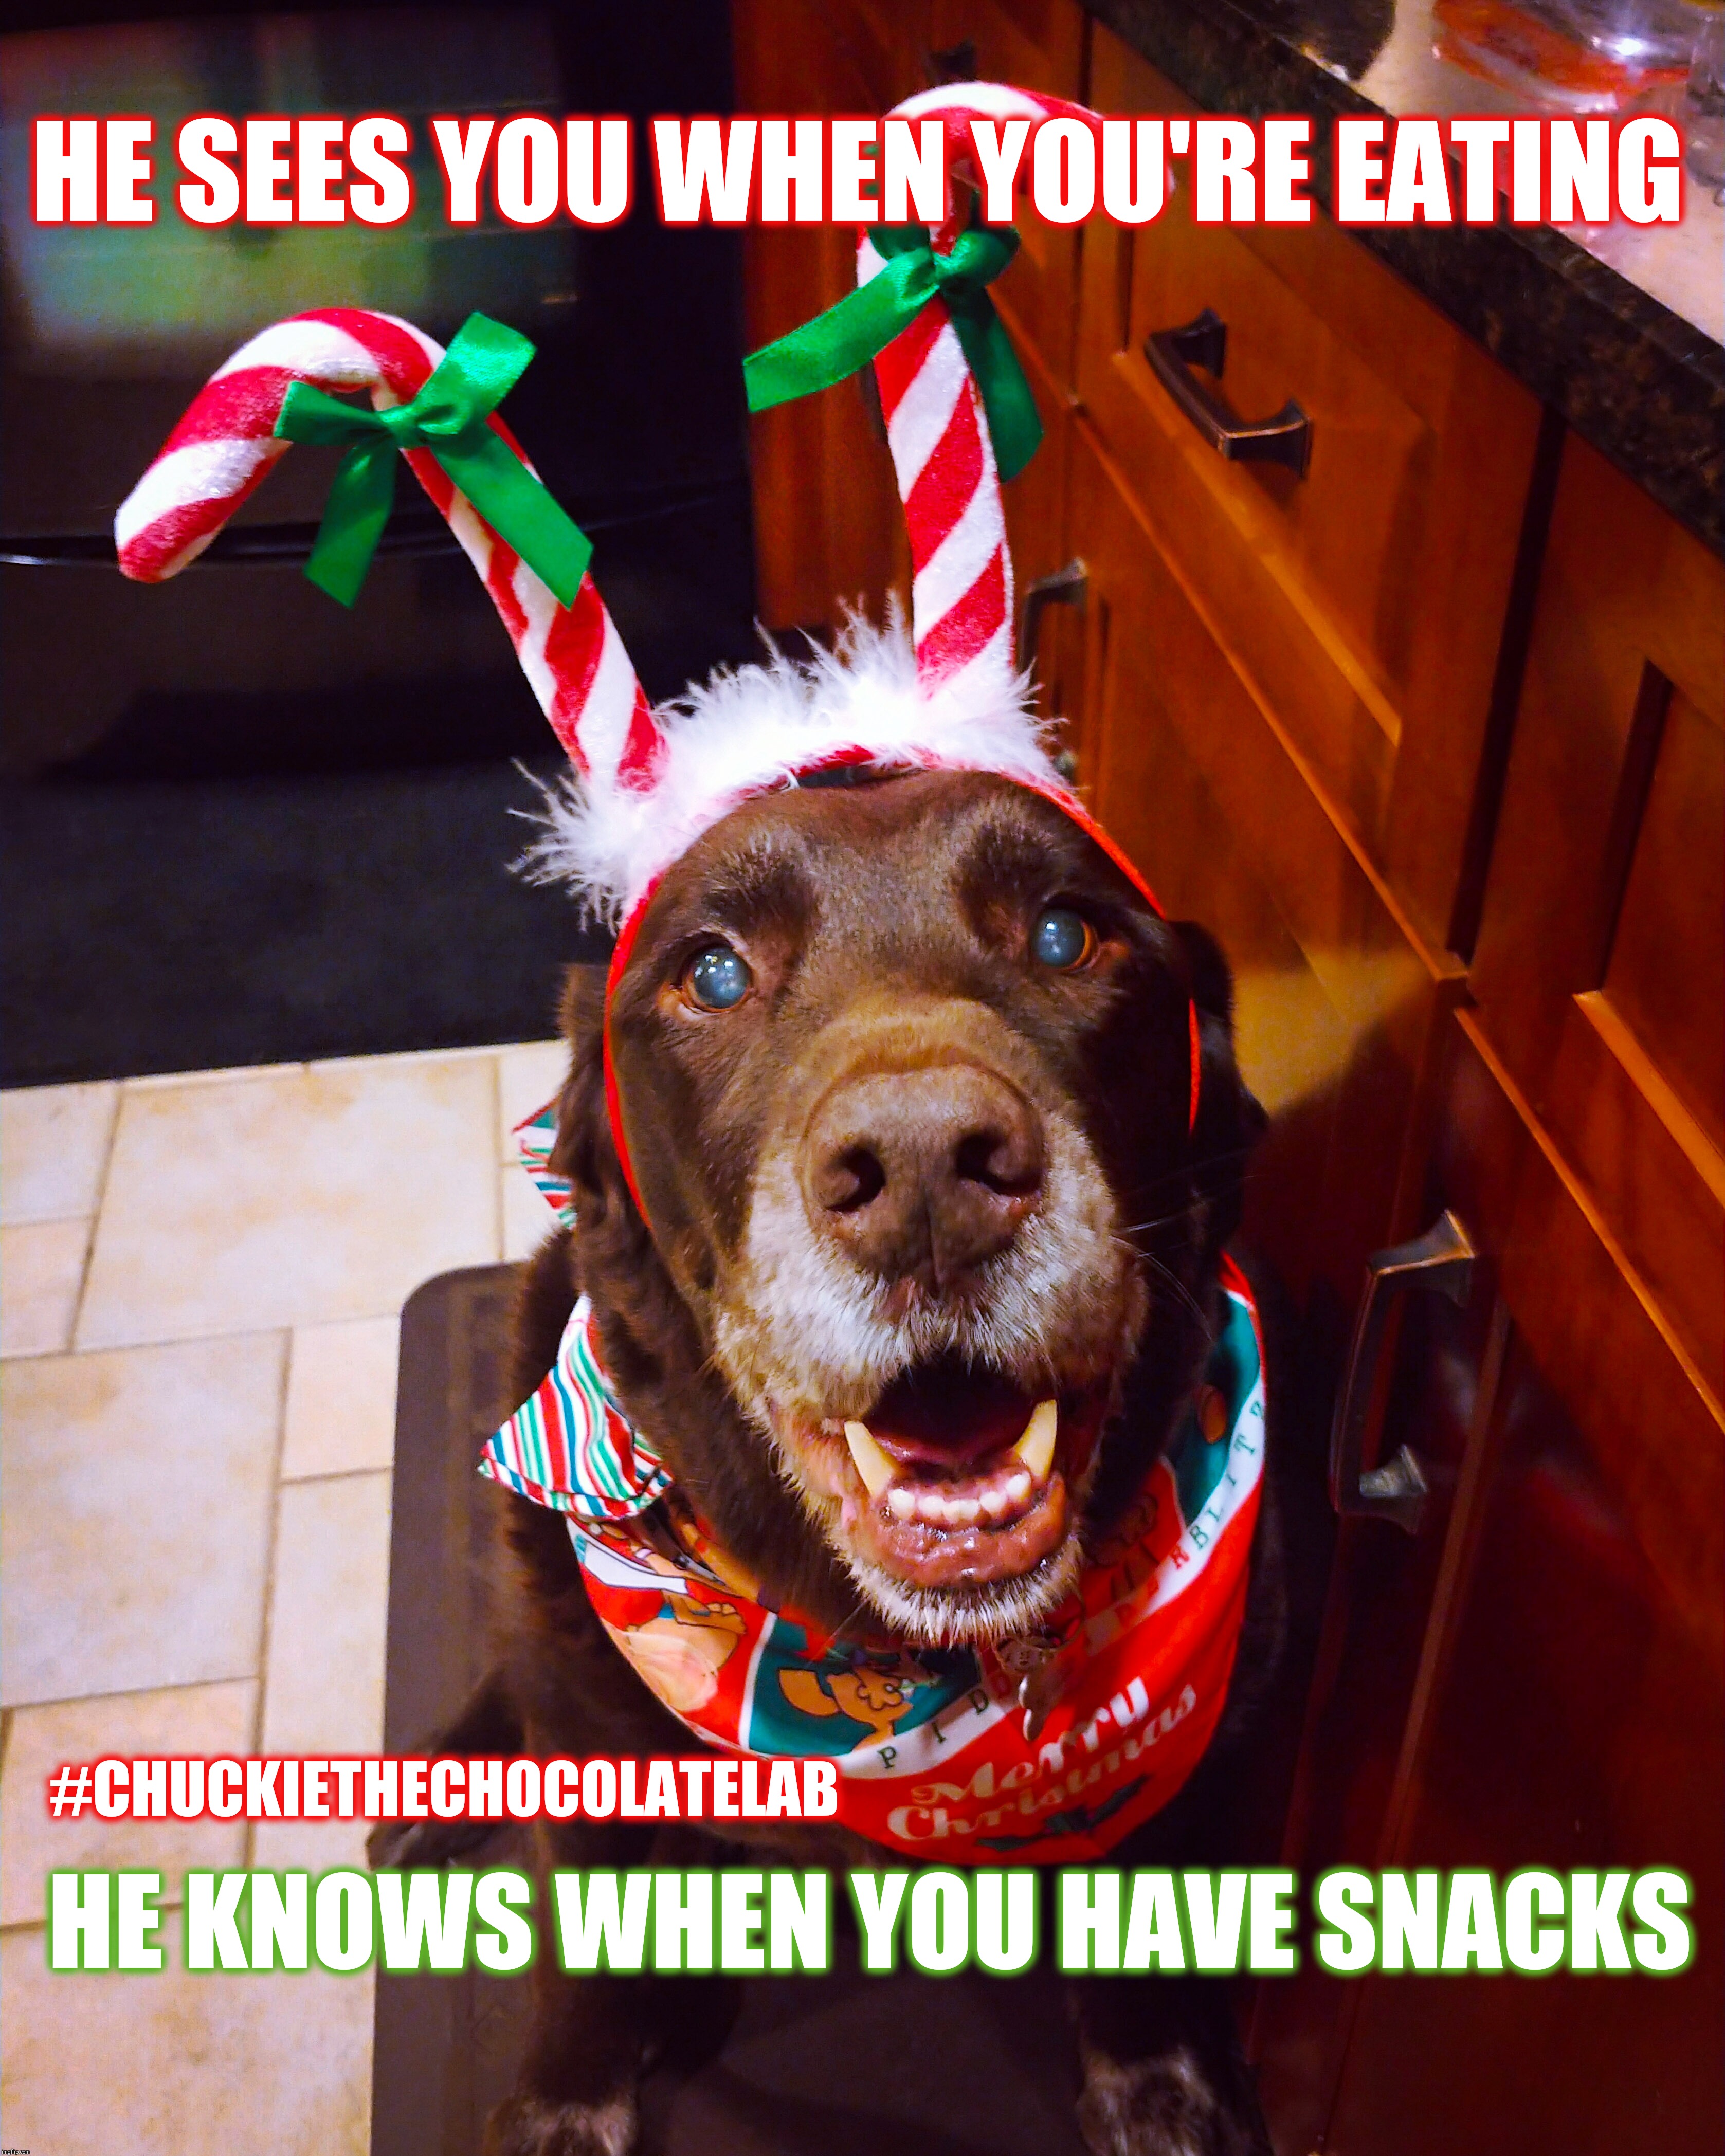 You better watch out | HE SEES YOU WHEN YOU'RE EATING; #CHUCKIETHECHOCOLATELAB; HE KNOWS WHEN YOU HAVE SNACKS | image tagged in chuckie the chocolate lab,dogs,funny,memes,christmas,snacks | made w/ Imgflip meme maker